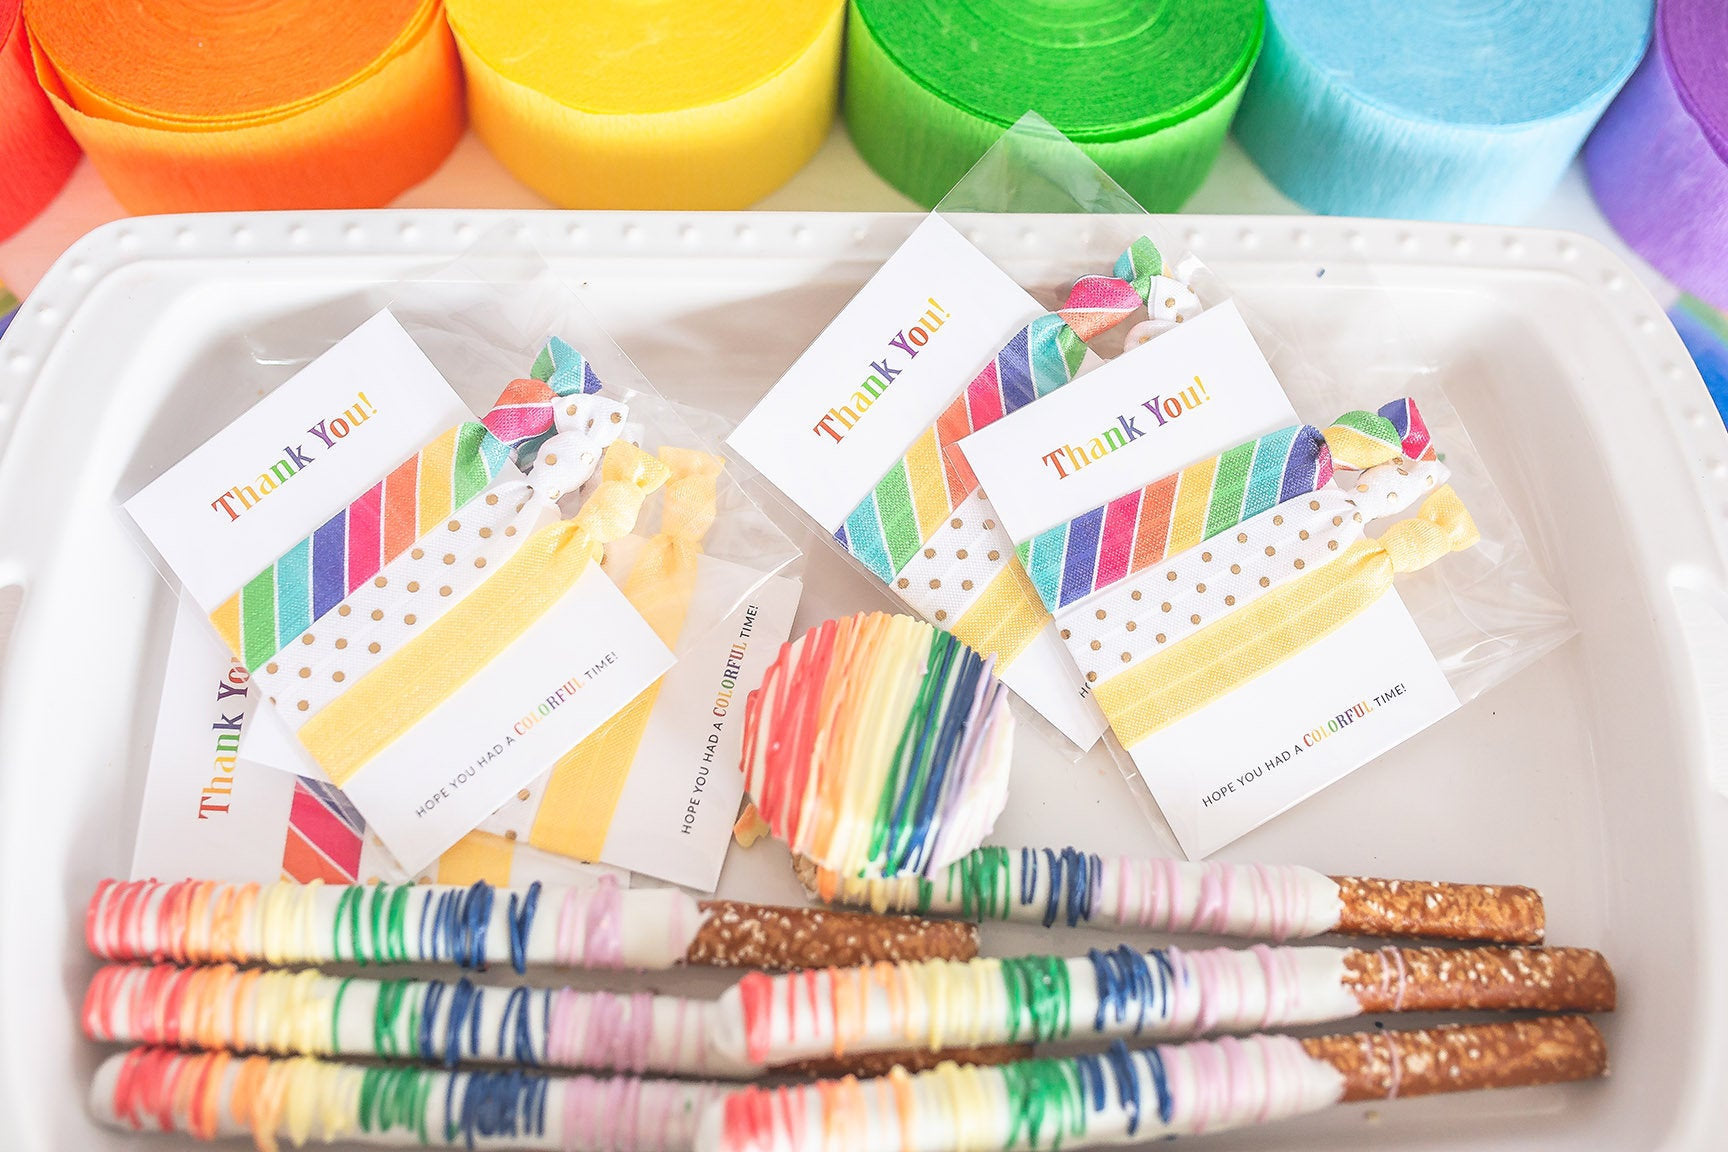 Make Your Own Rainbow Printable - Rainbow Party Favors - A Few Shortcuts